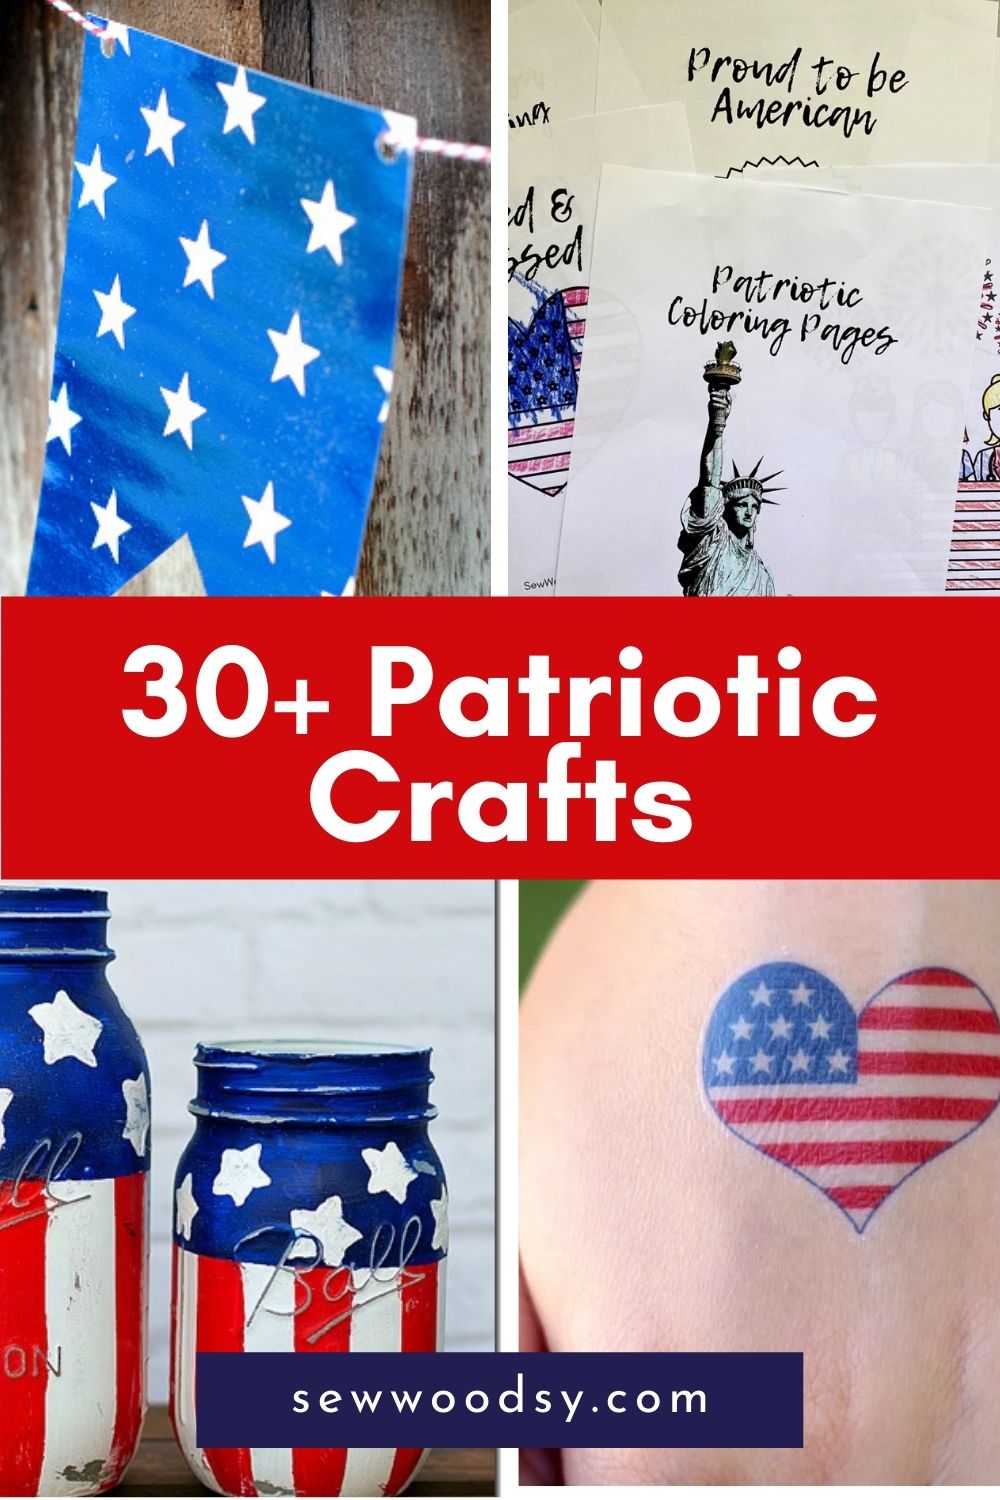 Four photos of patriotic crafts; tattoos, maason jars, banners, and coloring pages with text on image for Pinterest.